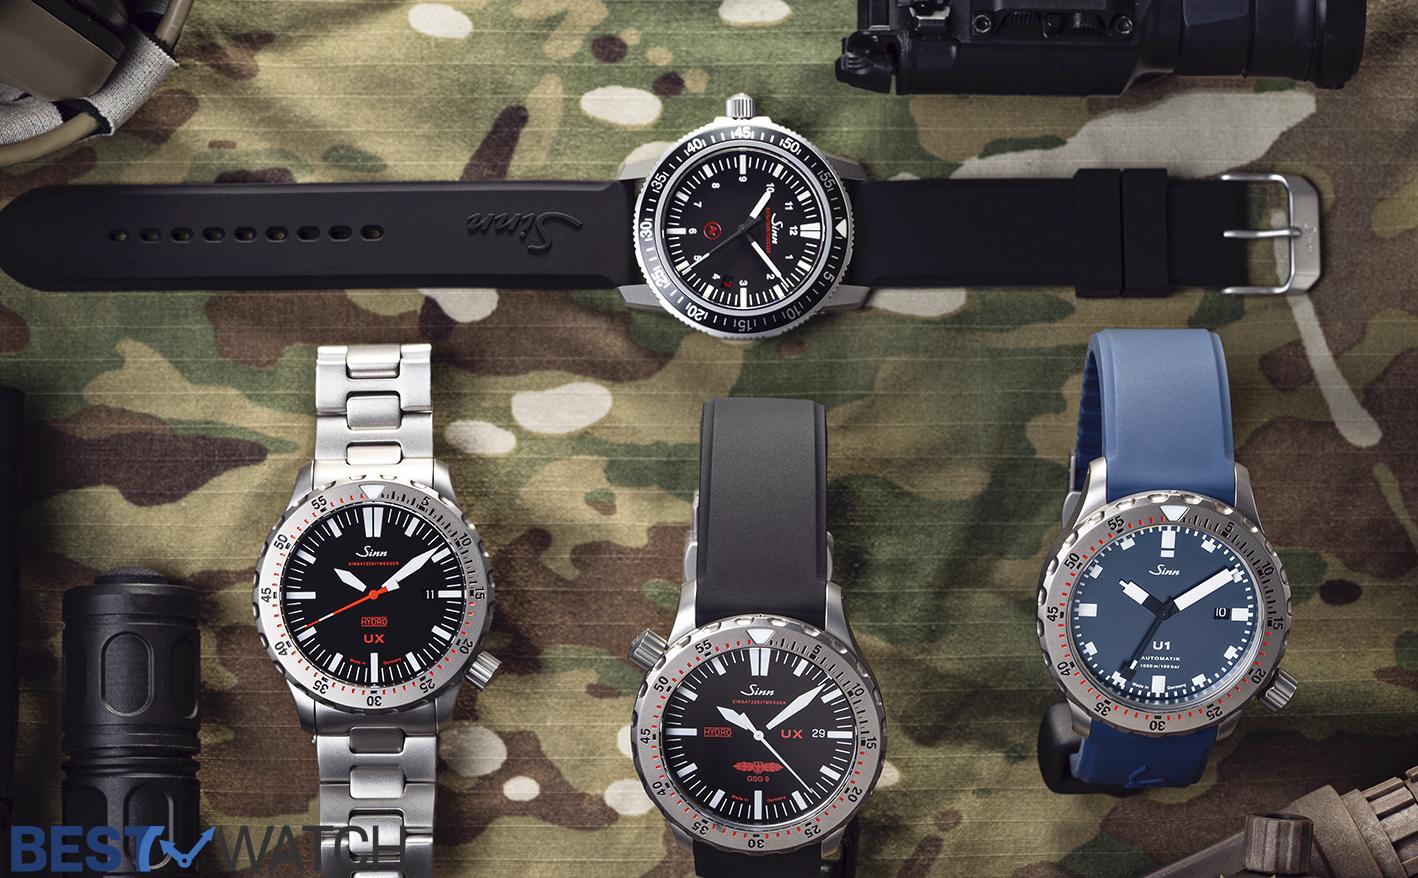 8 Legendary Tool Watches from Sinn That Exhibit The Art of German Watchmaking